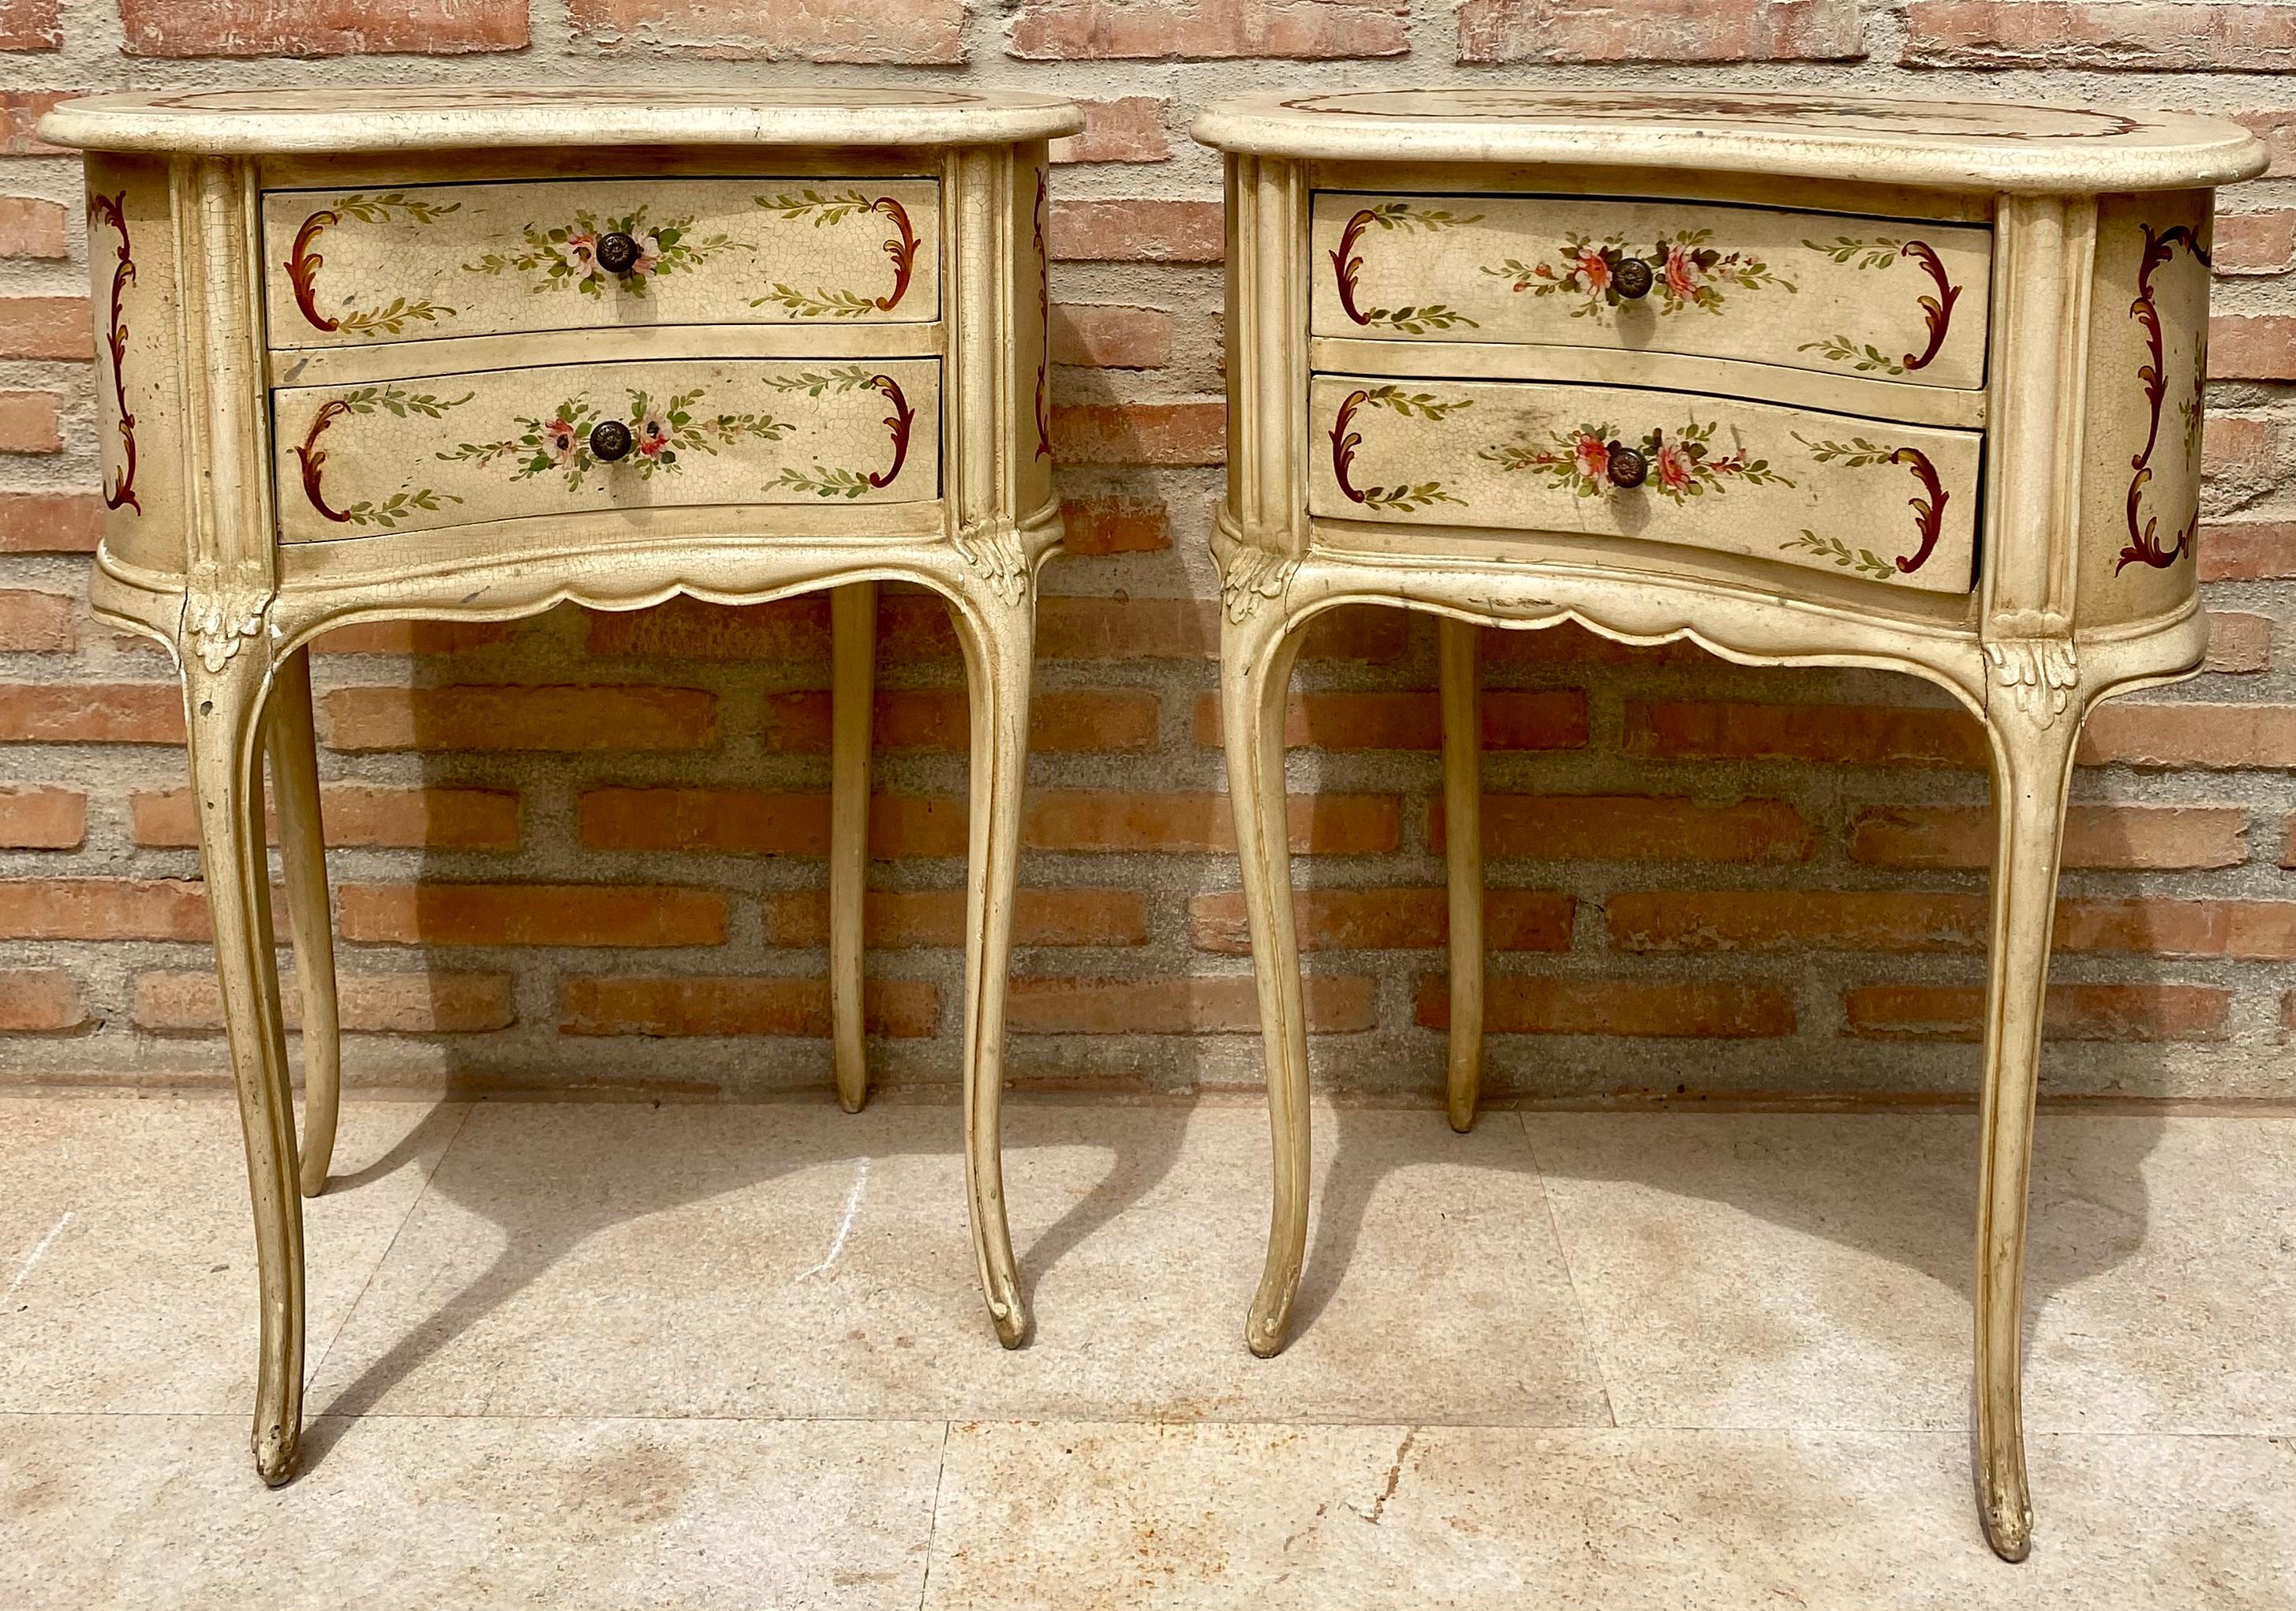 Two elegant bedside or side tables in solid wood, Louis XV style painted in light beige with floral touches. Made of carved wood, around 1940.
A superb 1940s French wooden two drawer kidney style nightstands in excellent vintage condition. Features